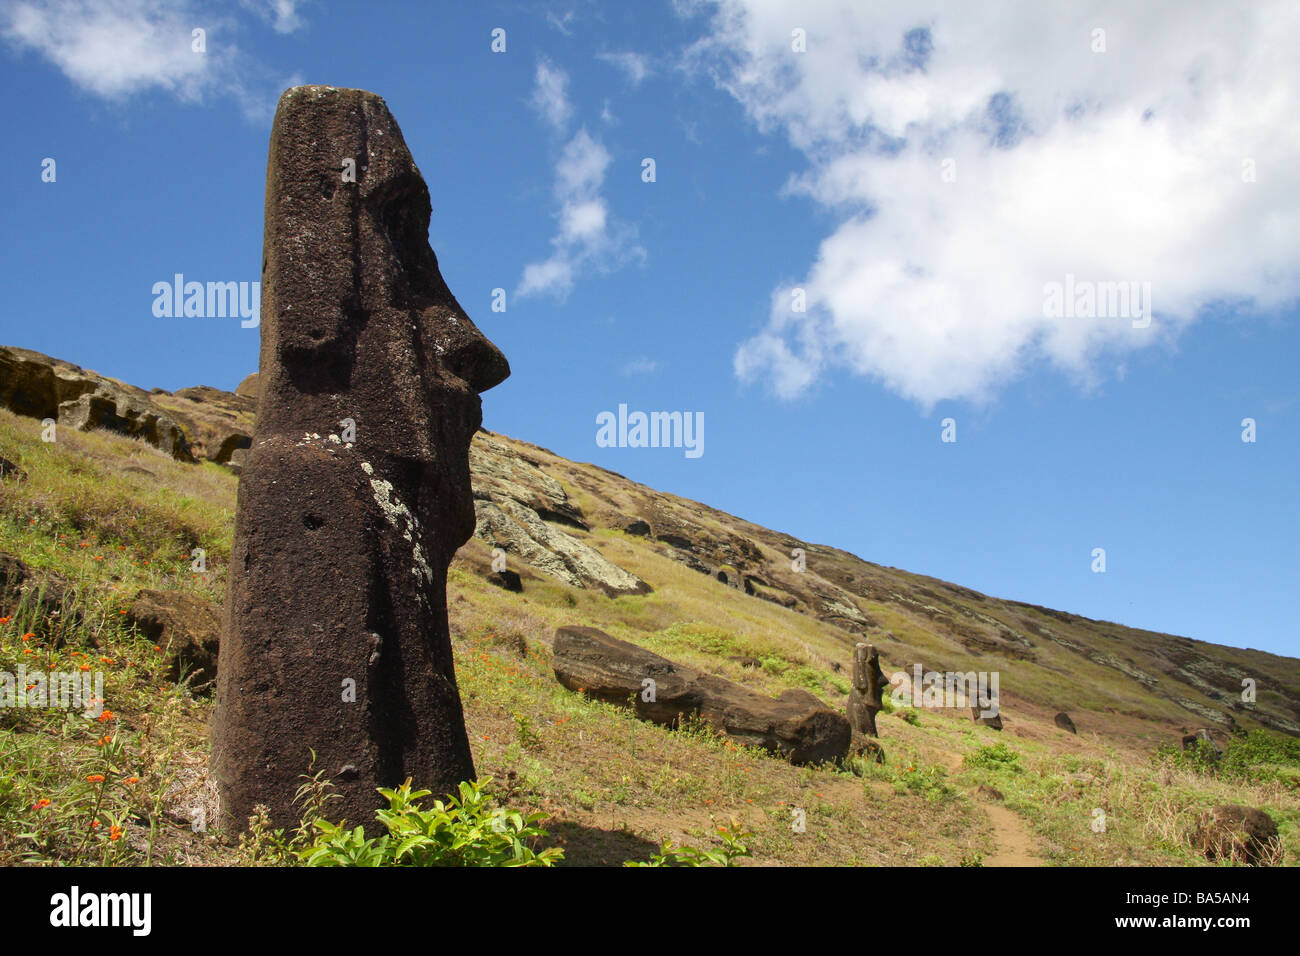 Stone statues moai standing on the hill on Easter Island Stock Photo